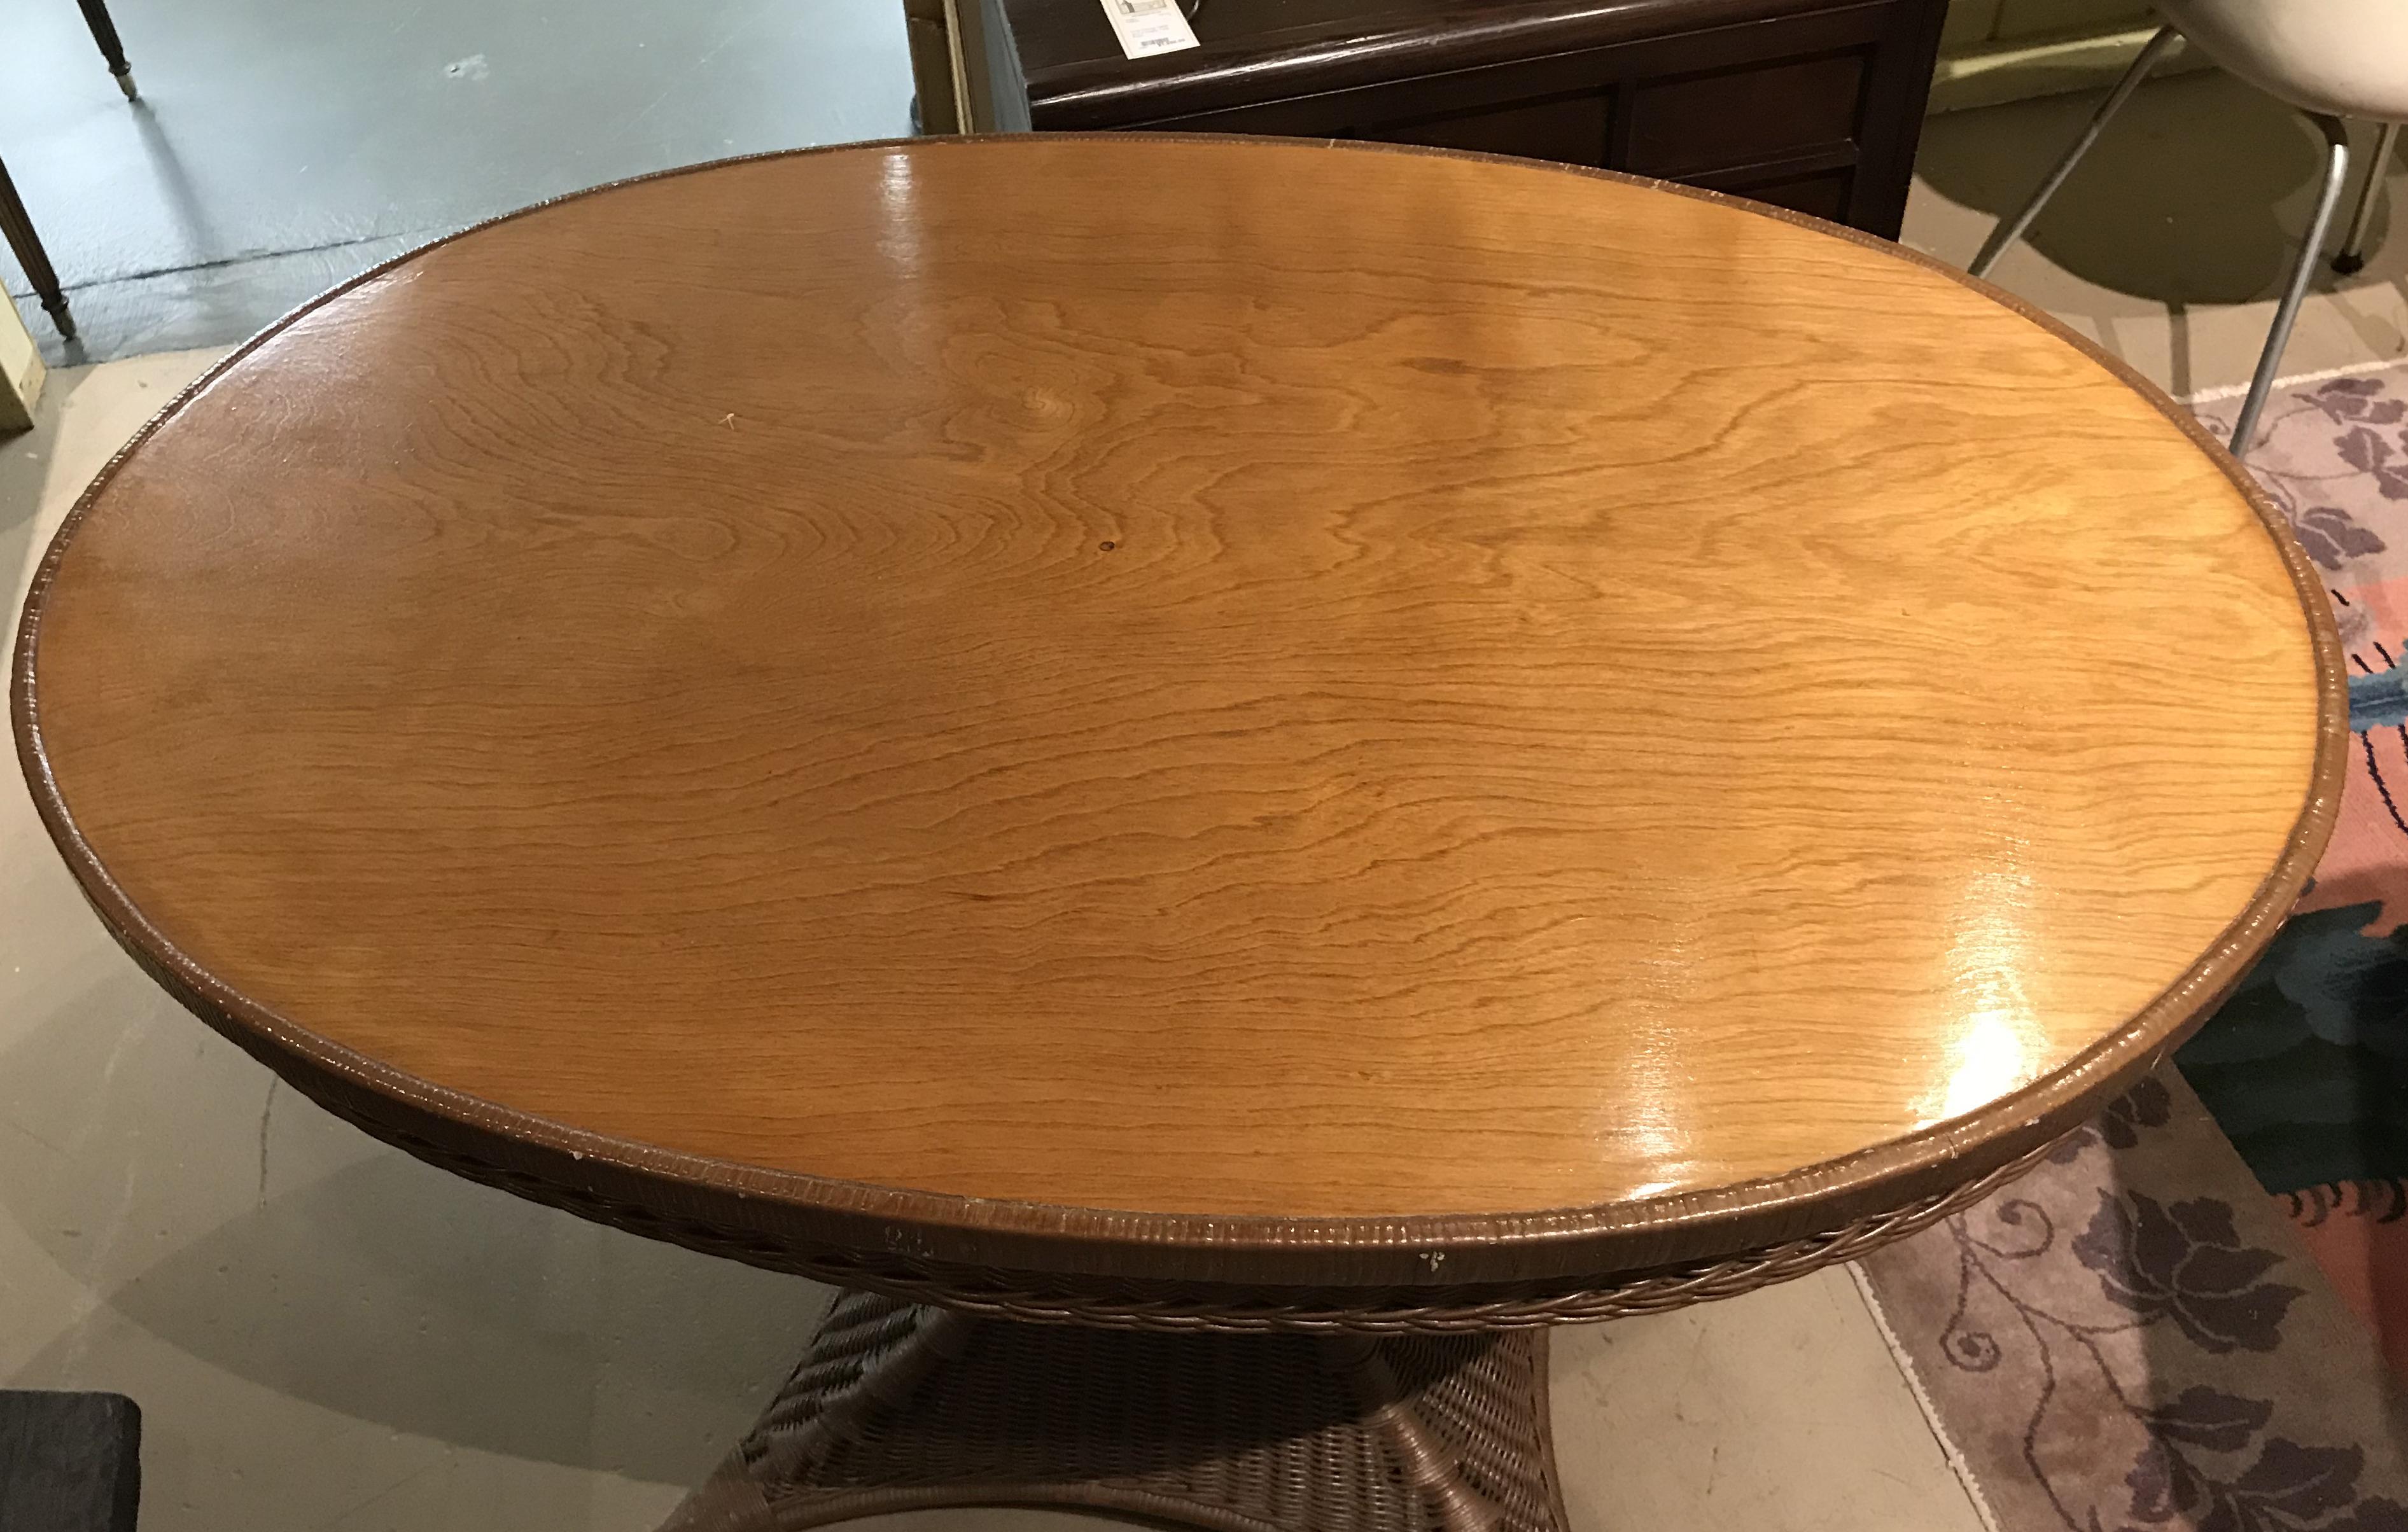 paine furniture company table